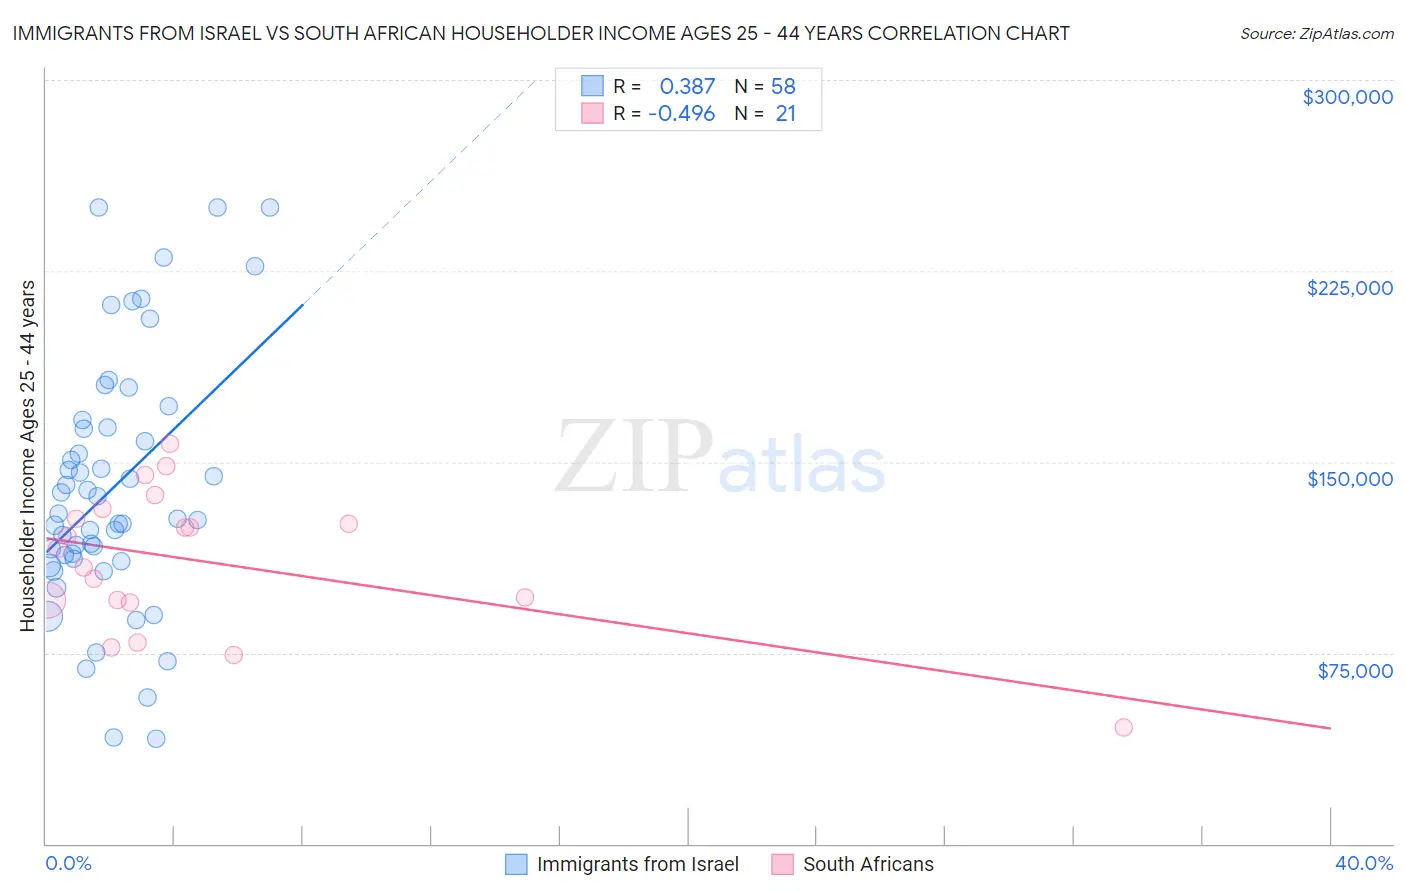 Immigrants from Israel vs South African Householder Income Ages 25 - 44 years